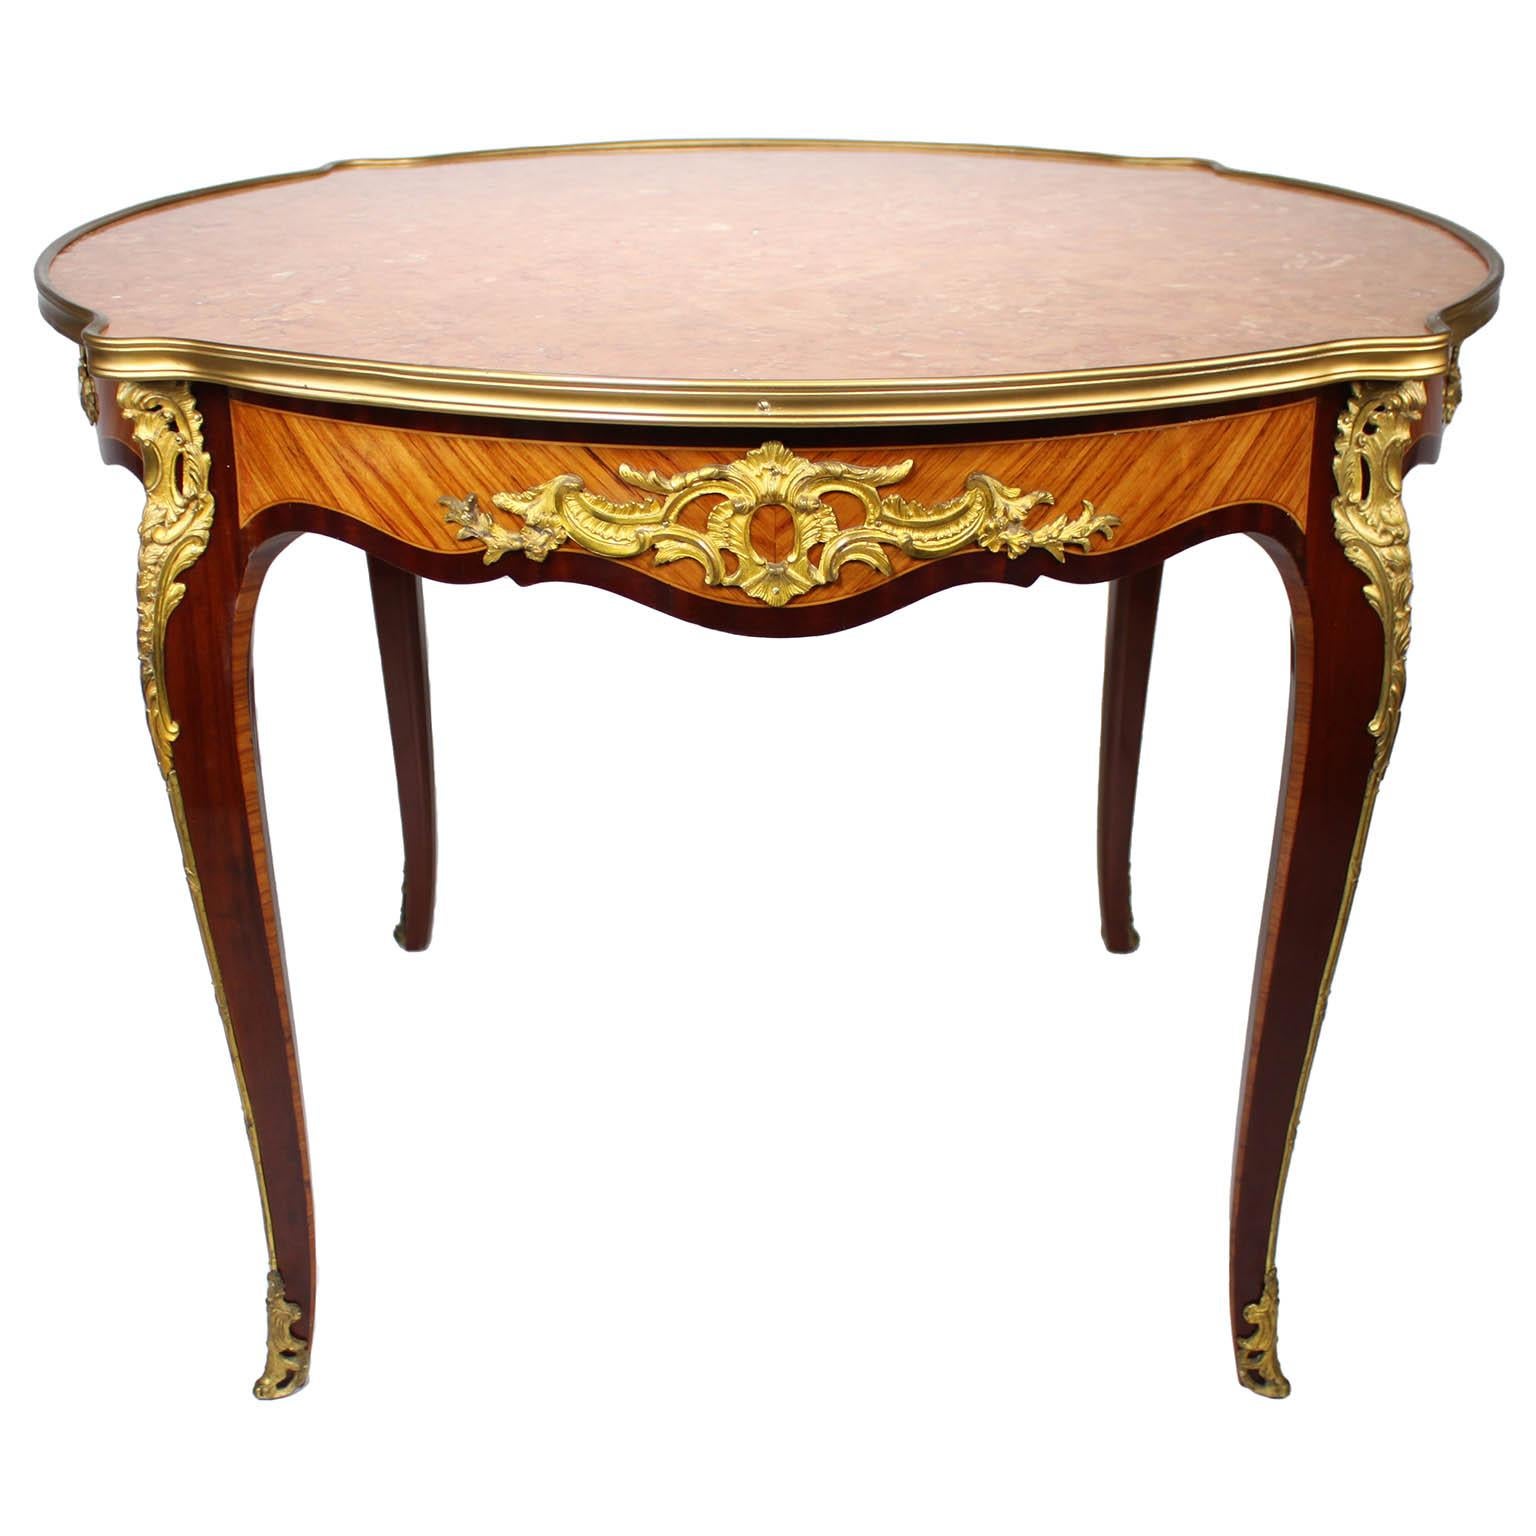 A Very Fine French 19th-20th Century Louis XV Style Mahogany and Tulipwood Gilt-Bronze Mounted Circular Side or Center Table (Gueridon) Probably by Maison Jansen, Paris. The four cabriolet legs fitted on each angle with acanthus ormolu mounts, the